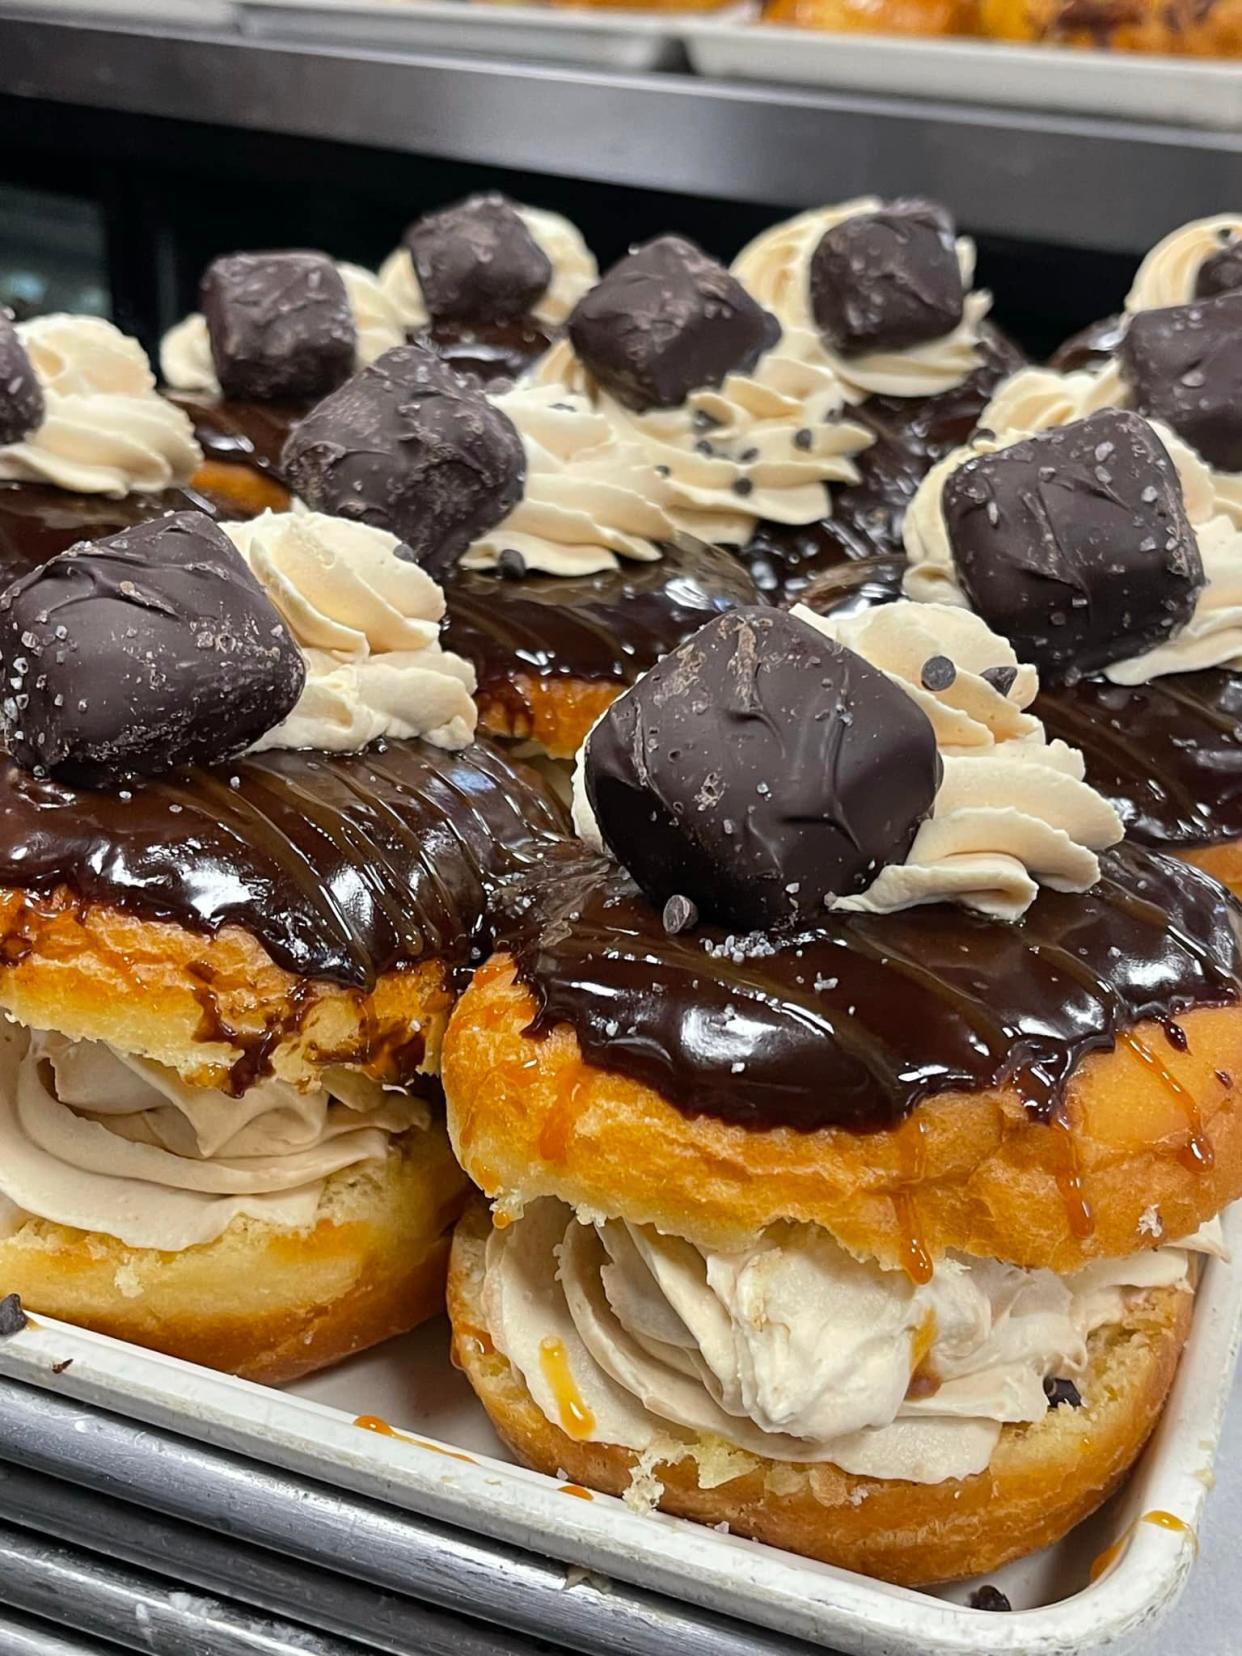 Dig into the Sea Salt Caramel Donut at The Donut Factory.